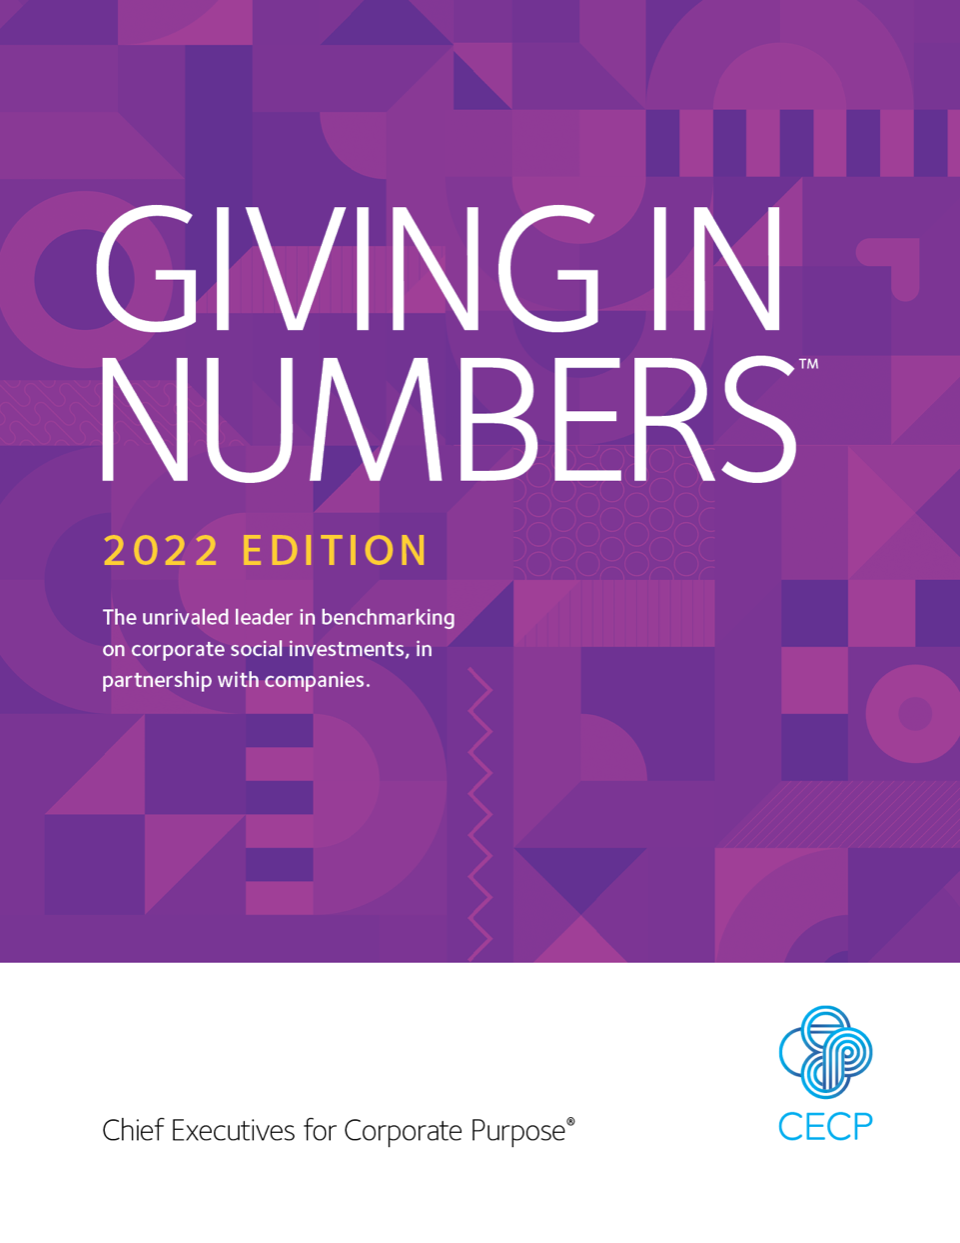 "Giving in Numbers 2022 Edition"